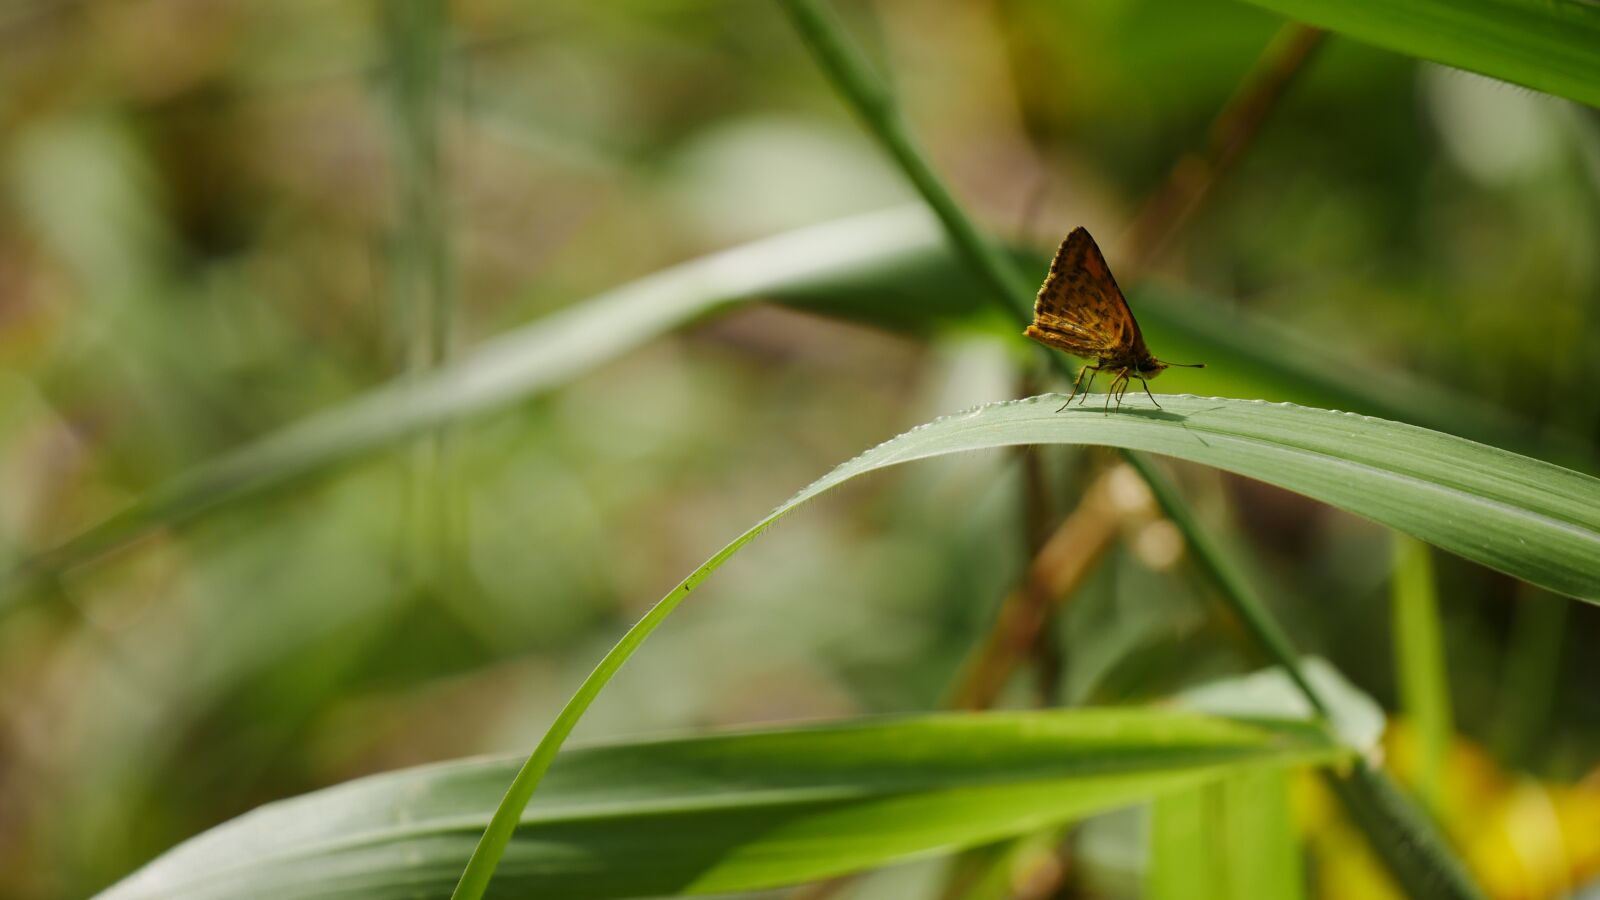 Panasonic Lumix DMC-GX85 (Lumix DMC-GX80 / Lumix DMC-GX7 Mark II) sample photo. Butterfly, insect, nature photography